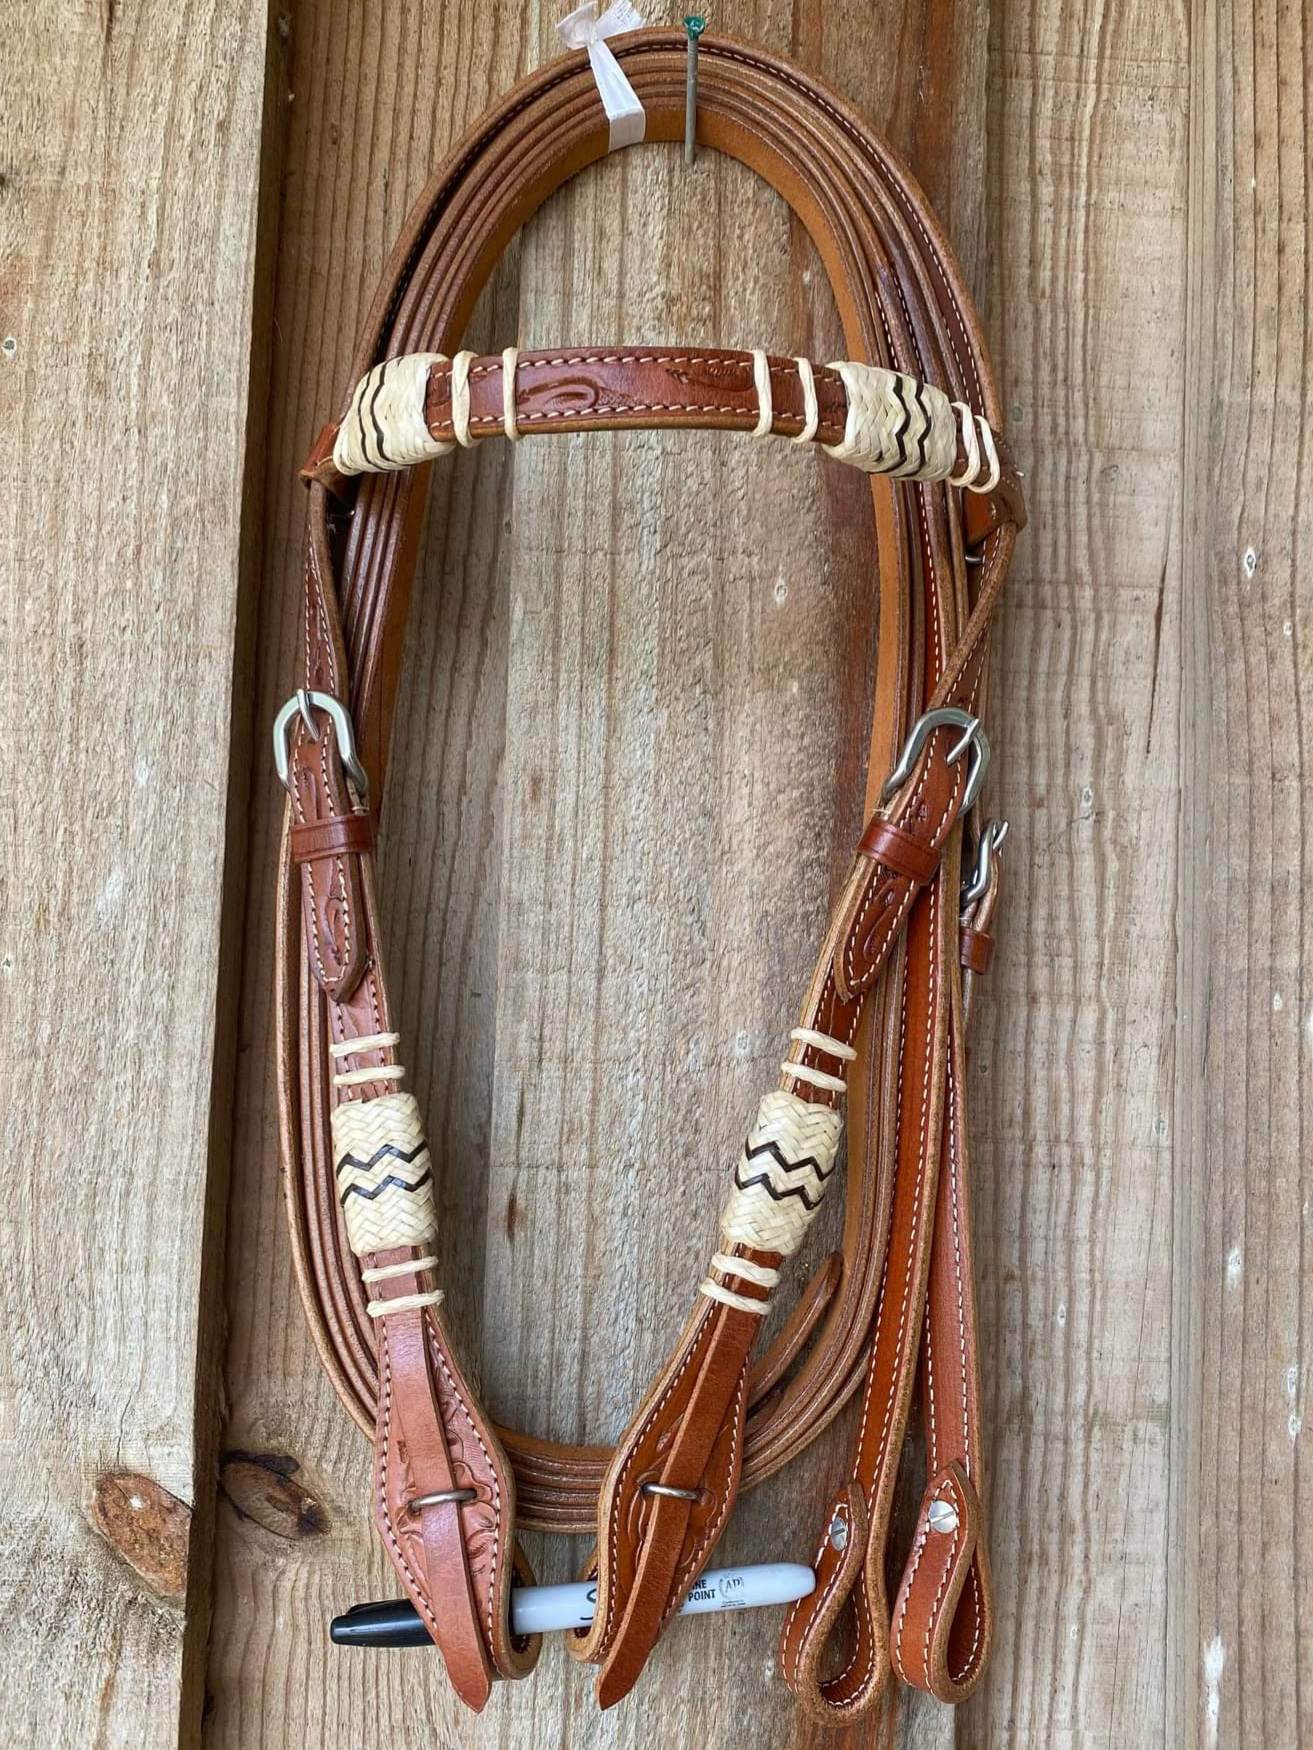 Western Bridle Browband Rawhide Accent Headstall comes w / reins